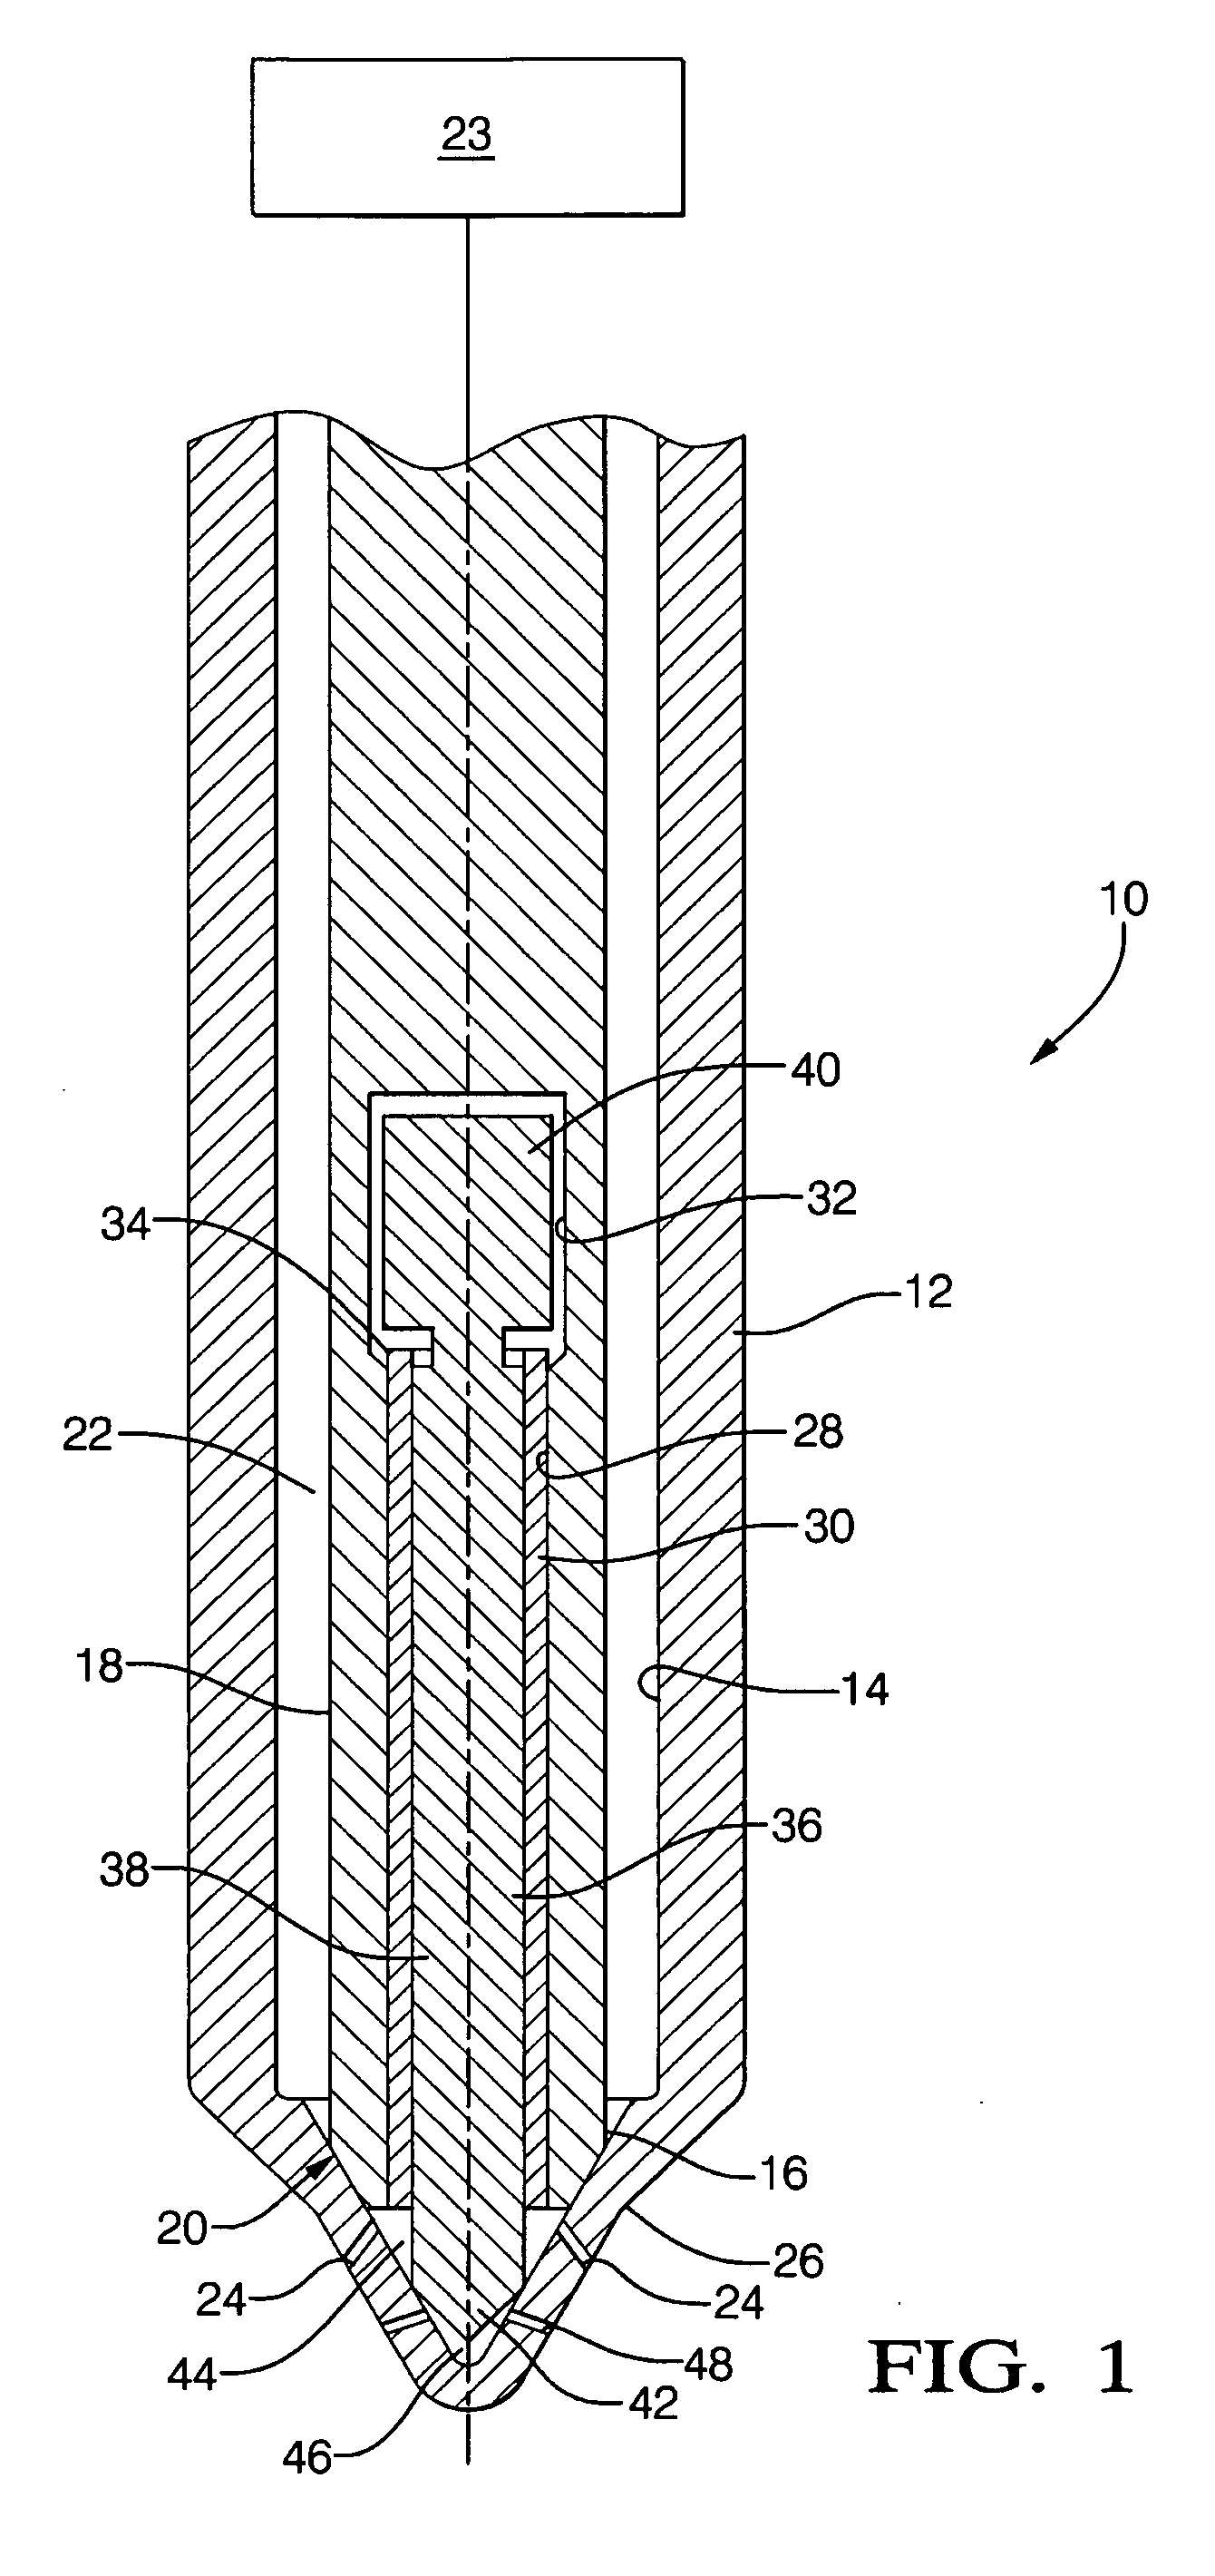 Apparatus and method for mode-switching fuel injector nozzle